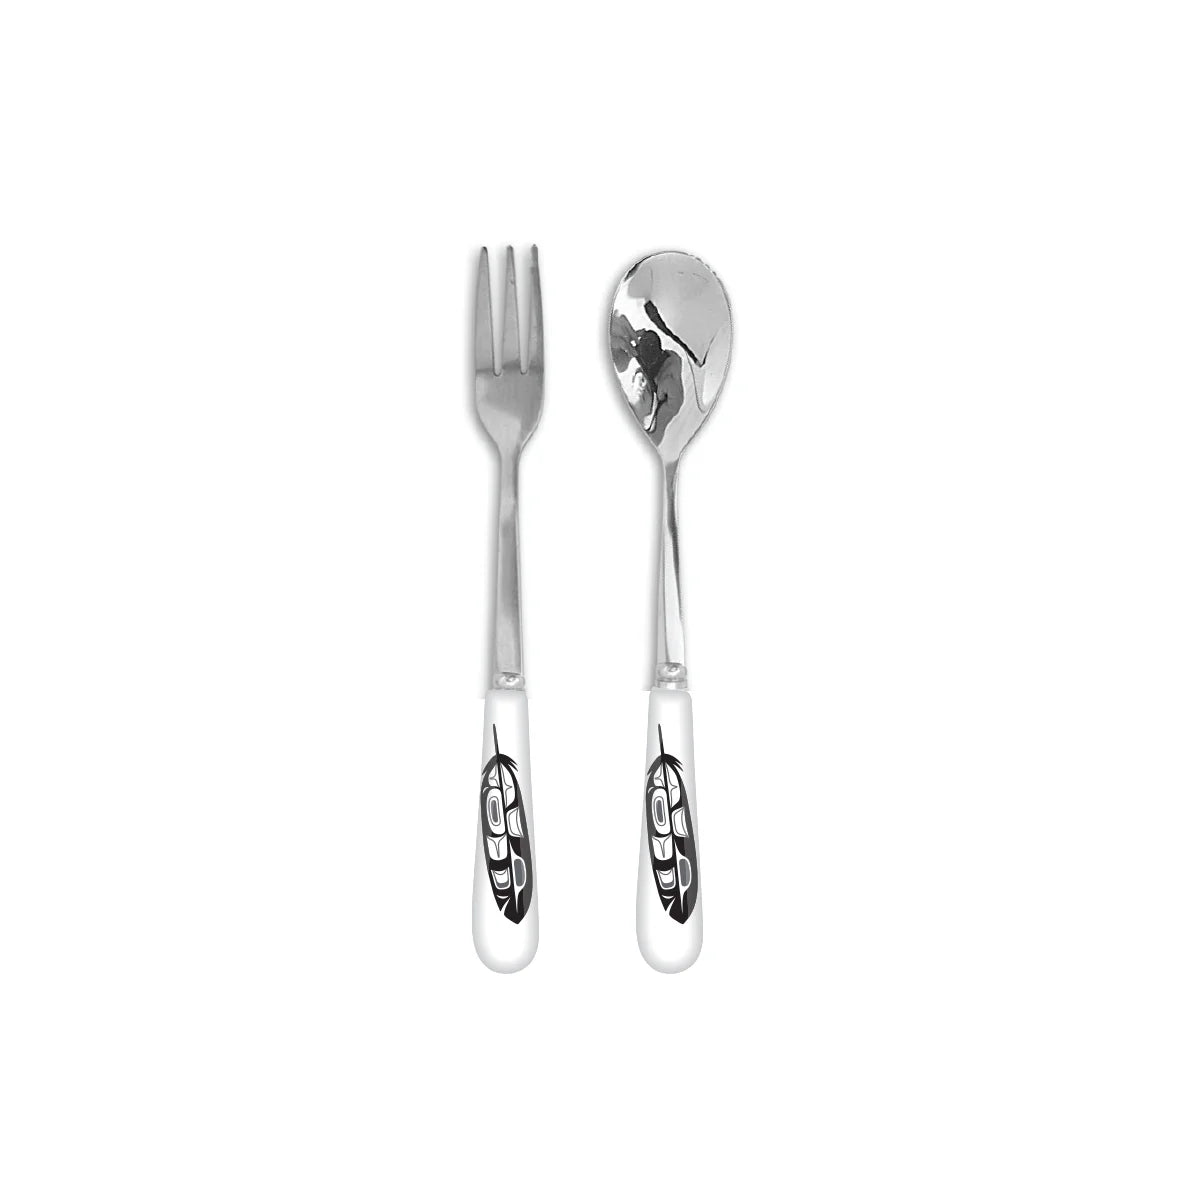 Appetizer Fork and Spoon Set